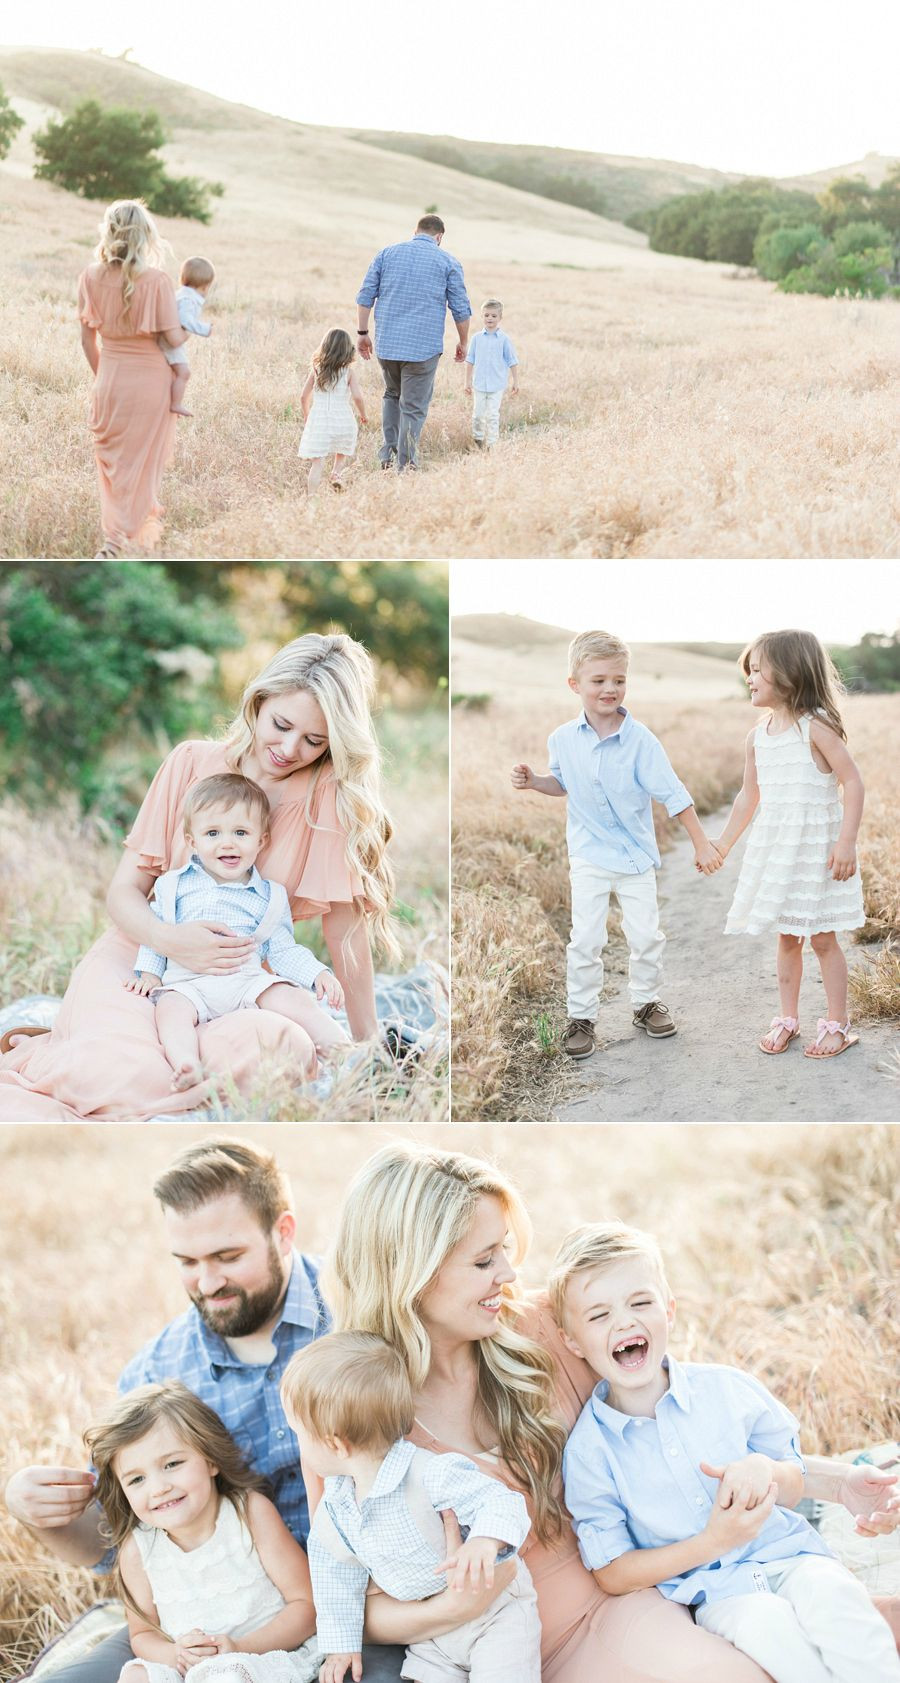 Family Picture Ideas Summer
 This location is one of my favorites in Orange County in